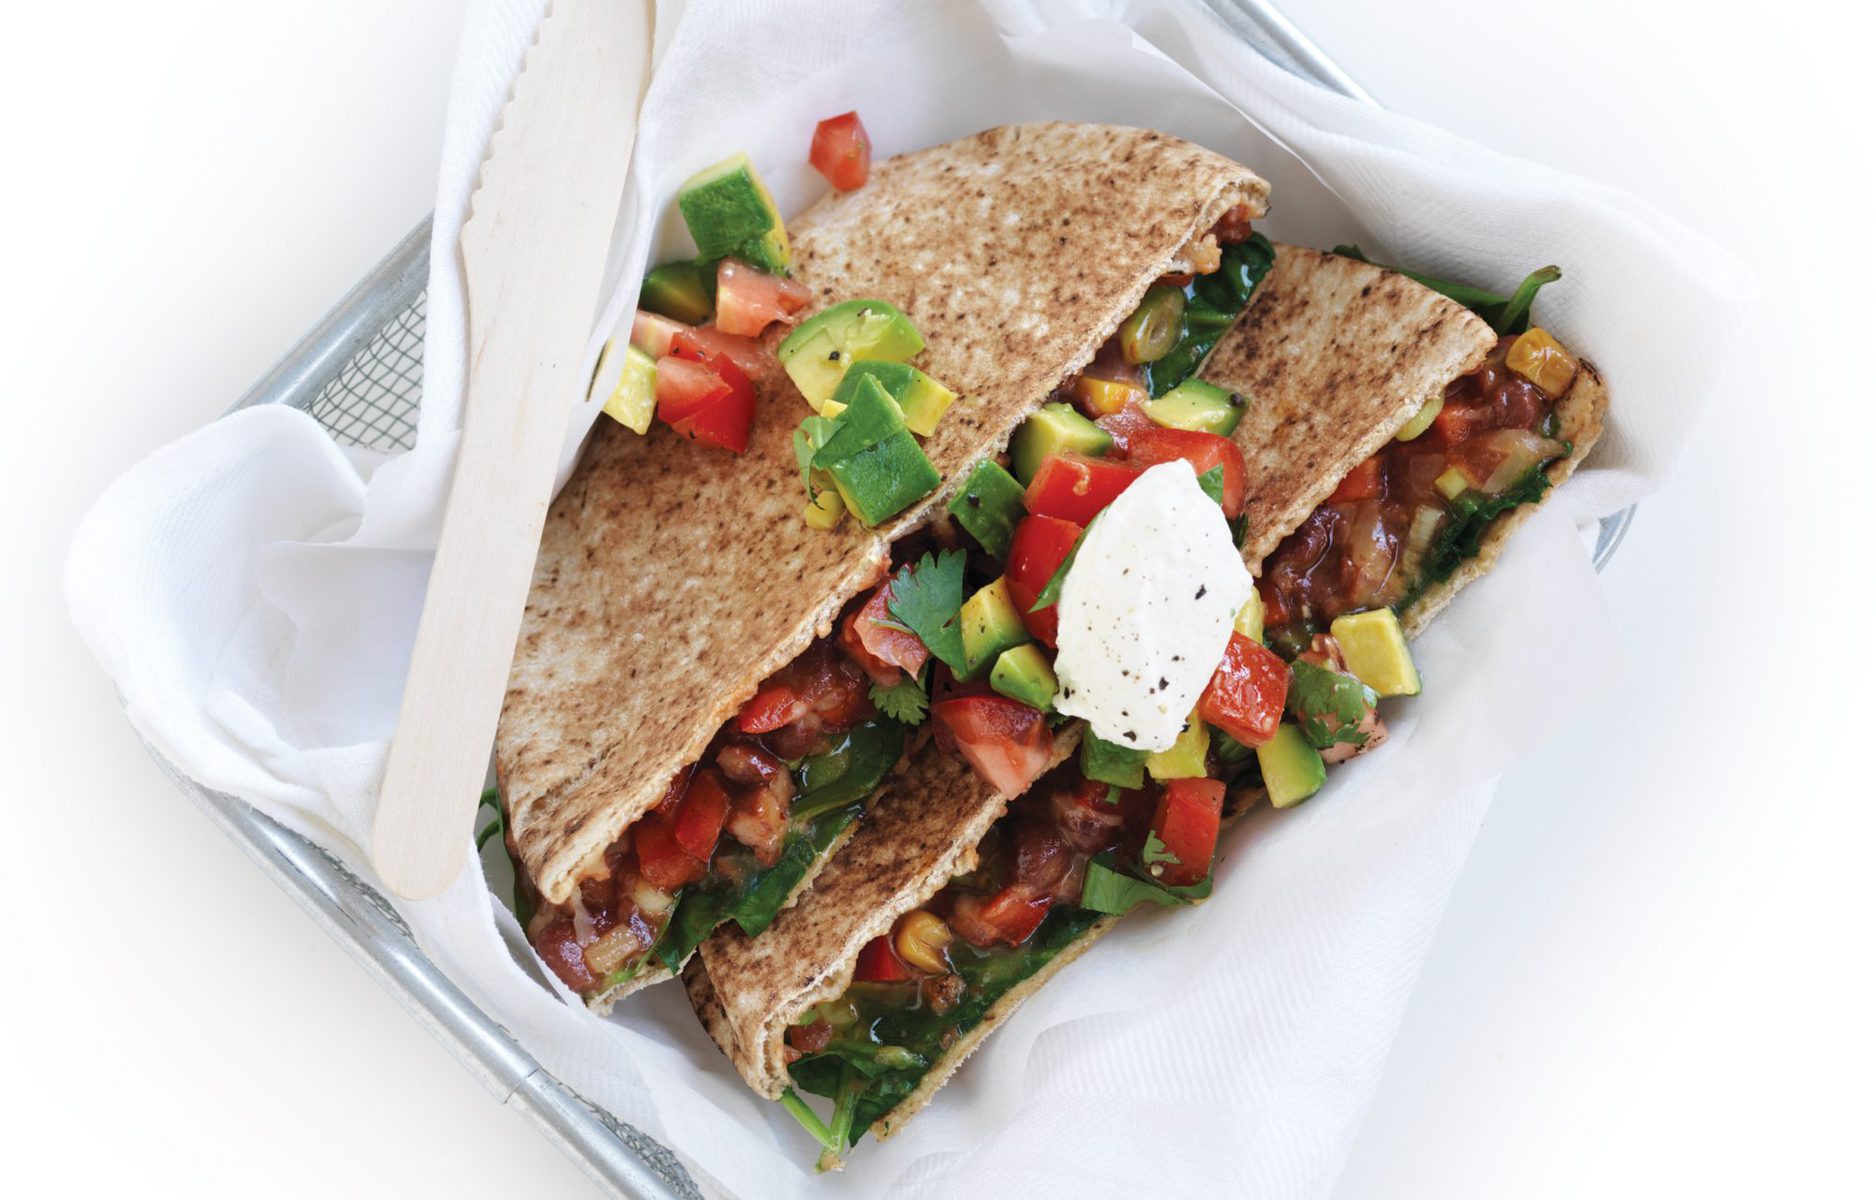 Bean quesadilla with tomato salsa Healthy Food Guide